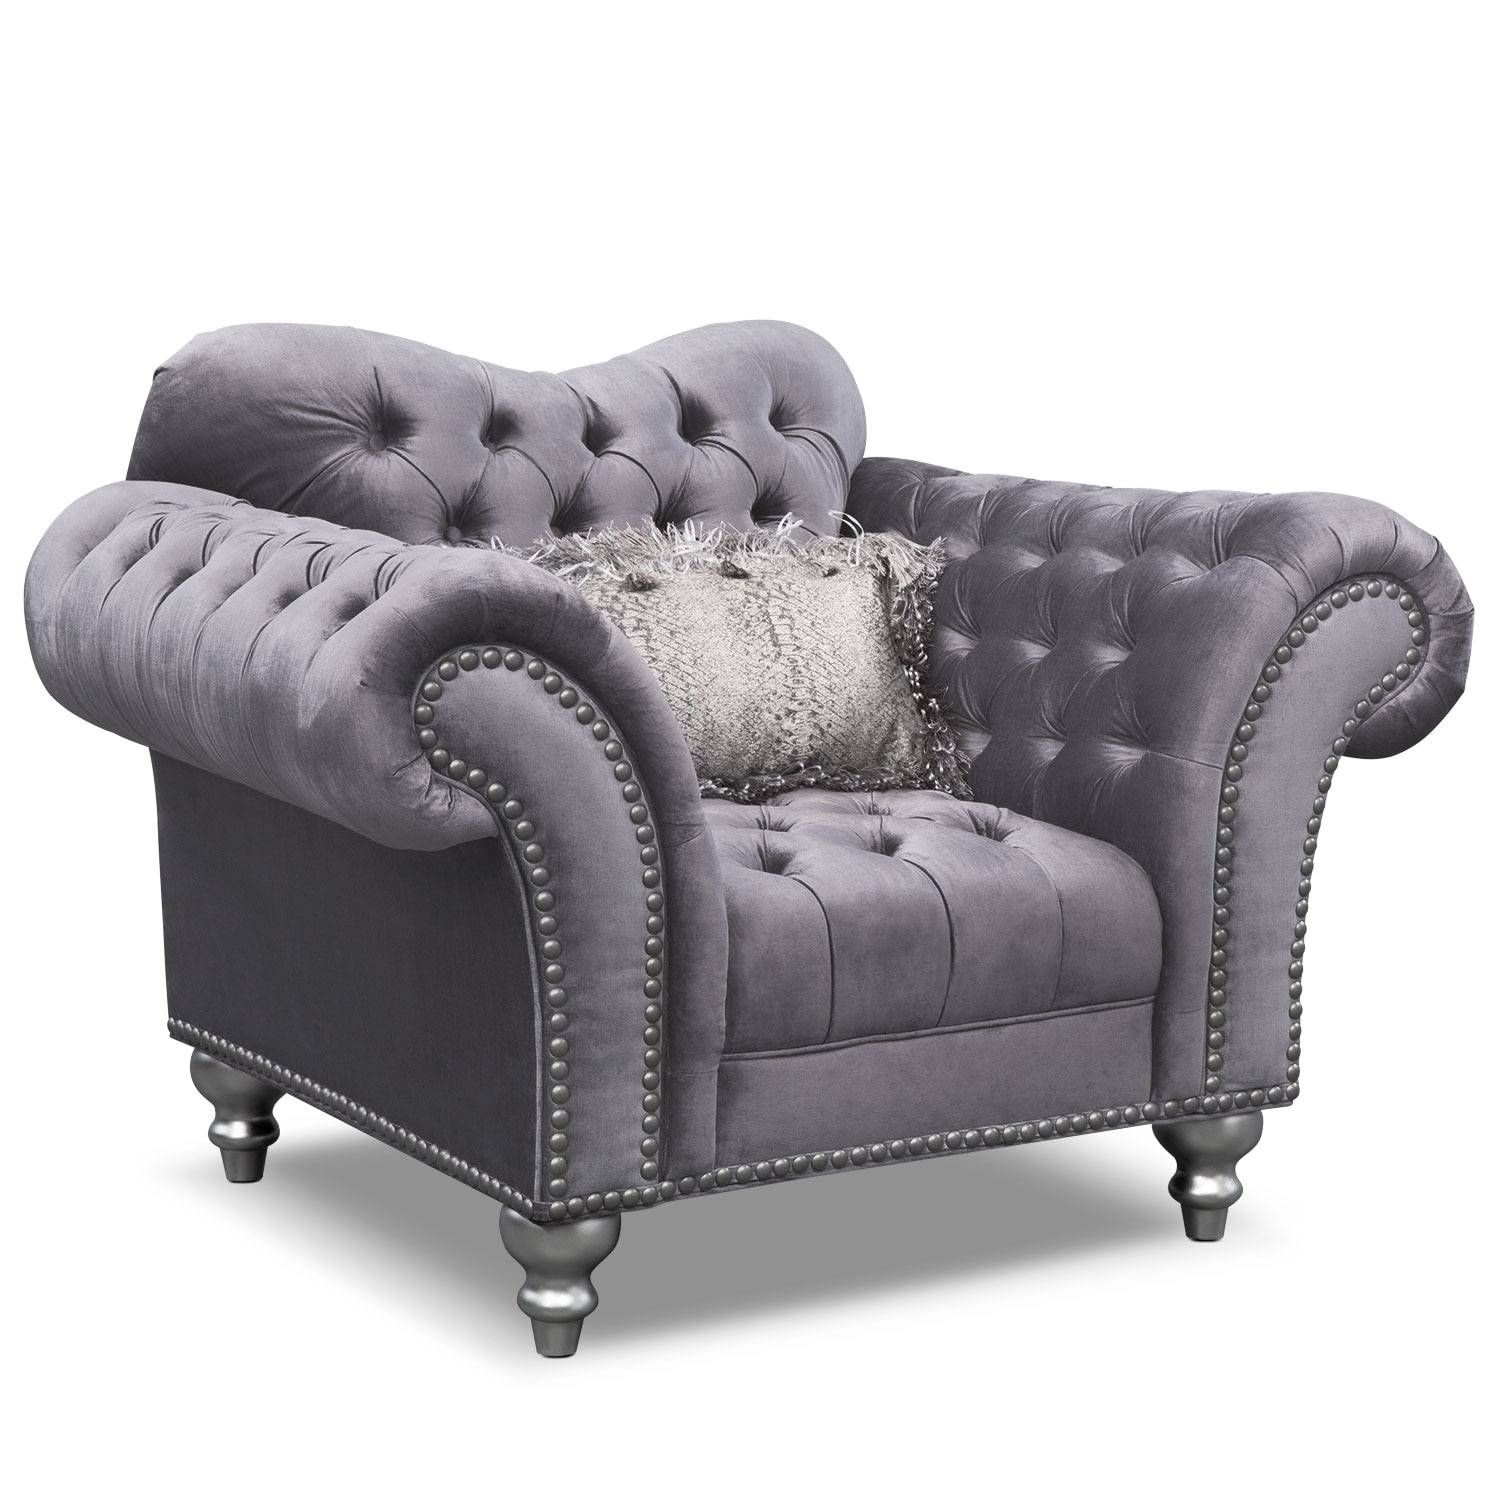 Brittney Sofa And Chair Set – Gray | American Signature Furniture With Regard To Sofa And Chair Set (View 30 of 30)